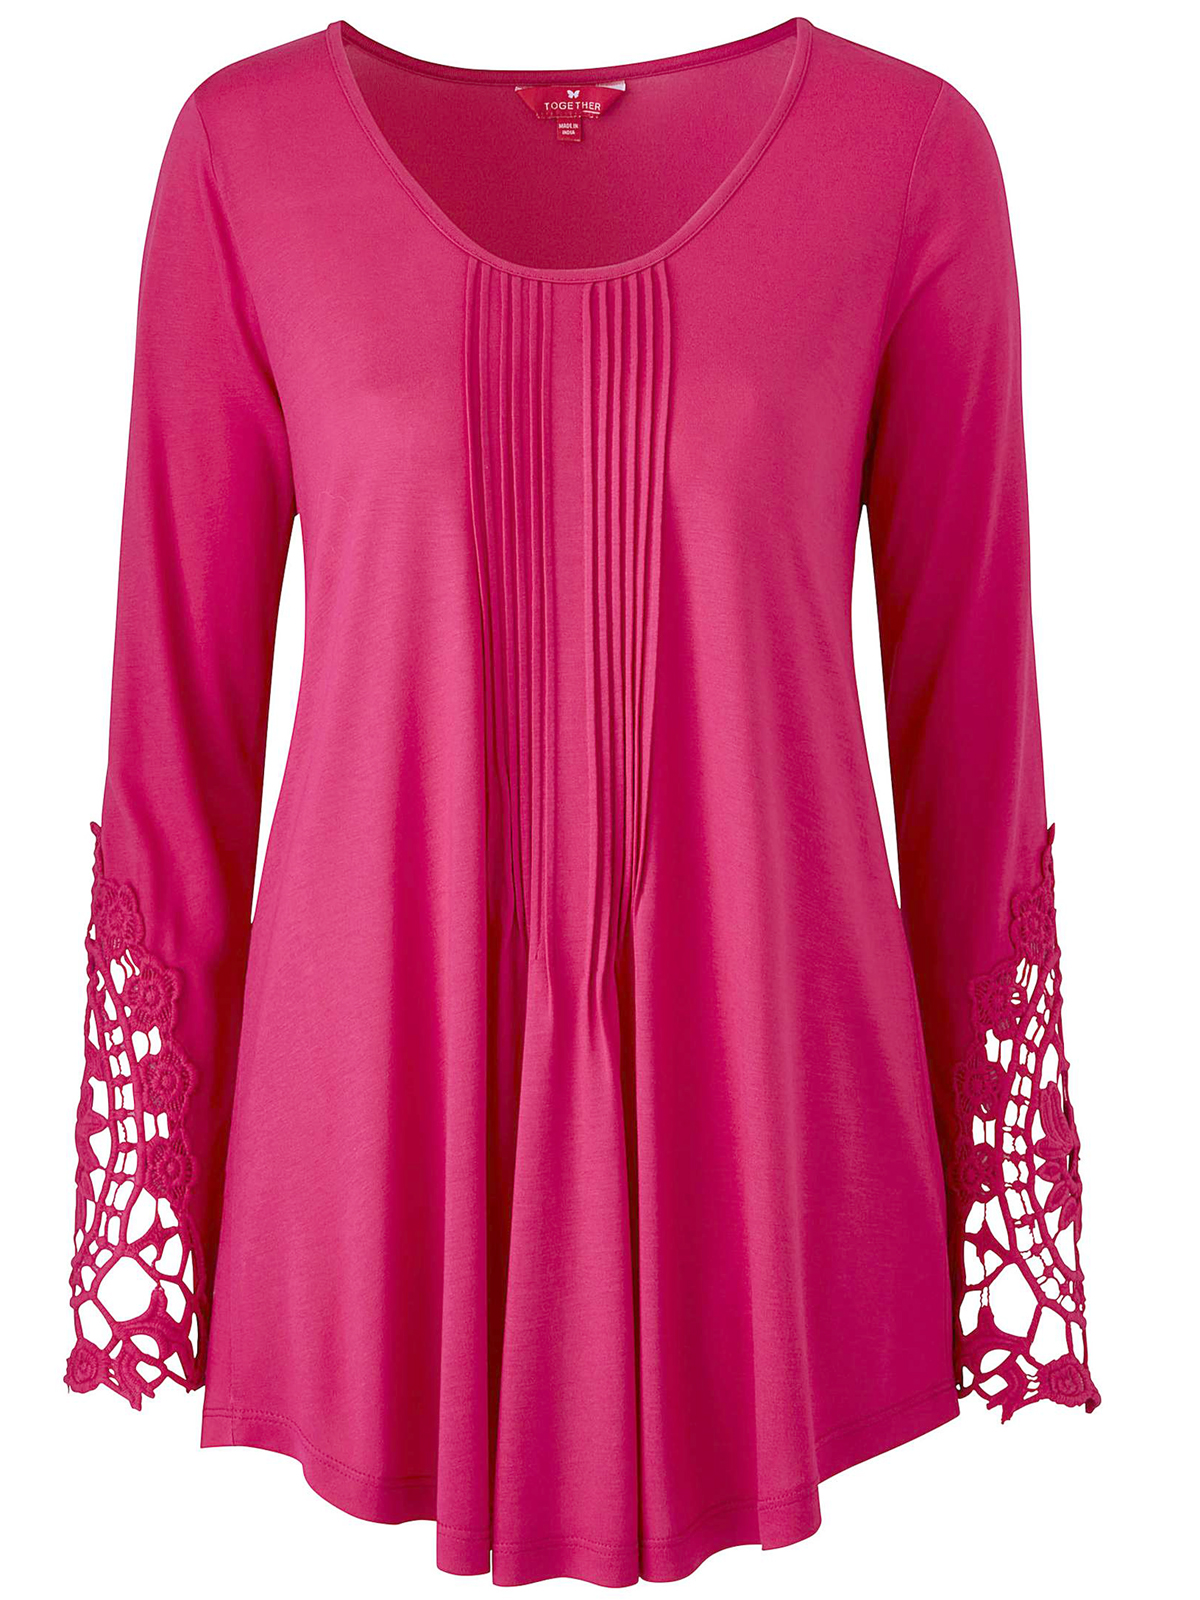 Together PINK Lace Sleeve Jersey Top - Plus Size 12 to 32